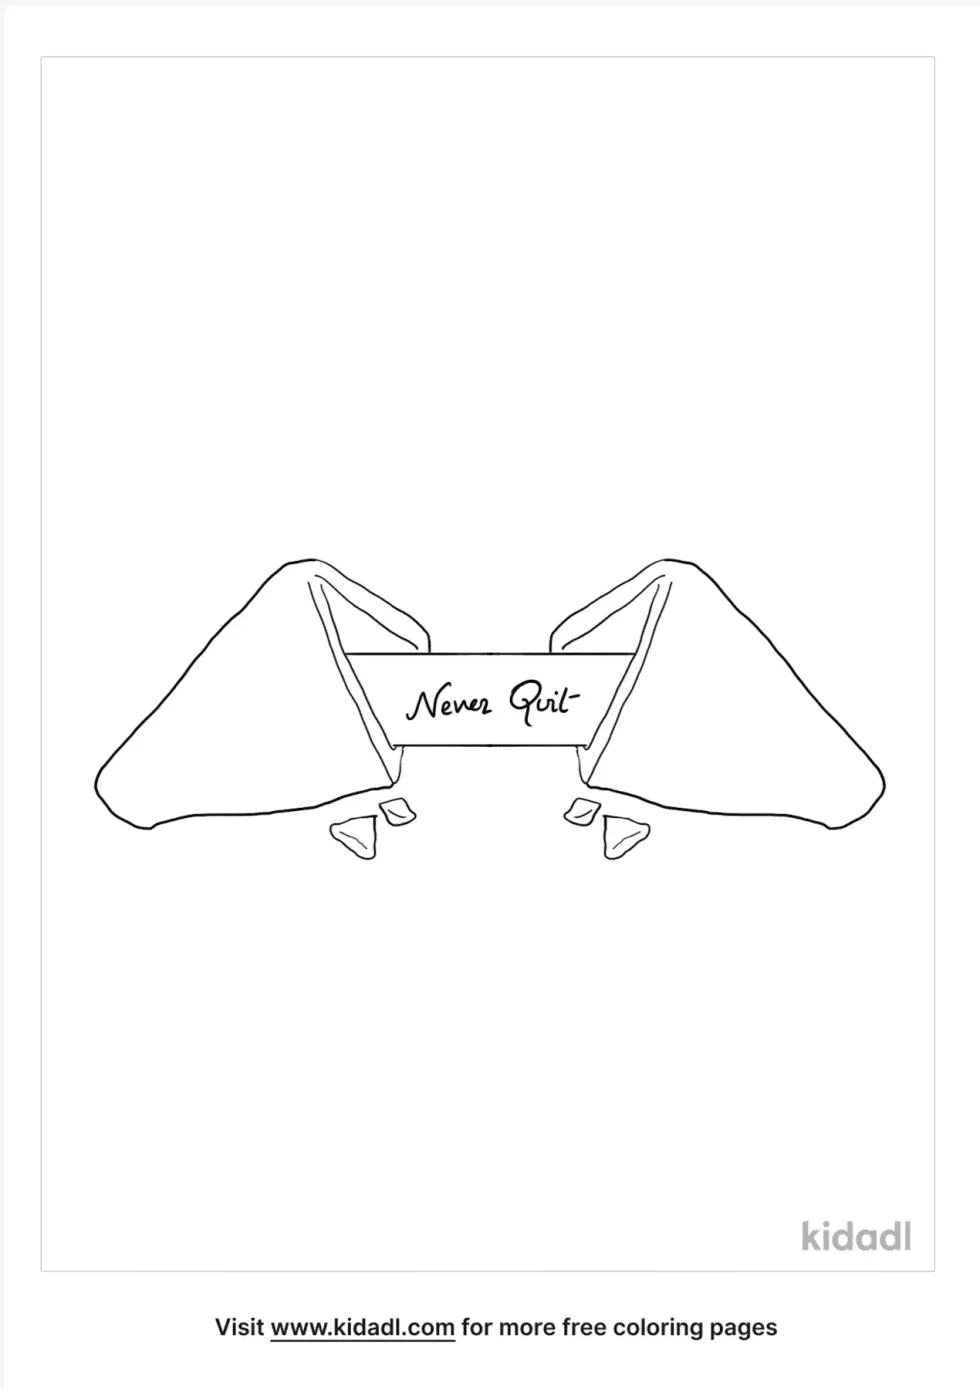 Broken Fortune Cookie Coloring Page